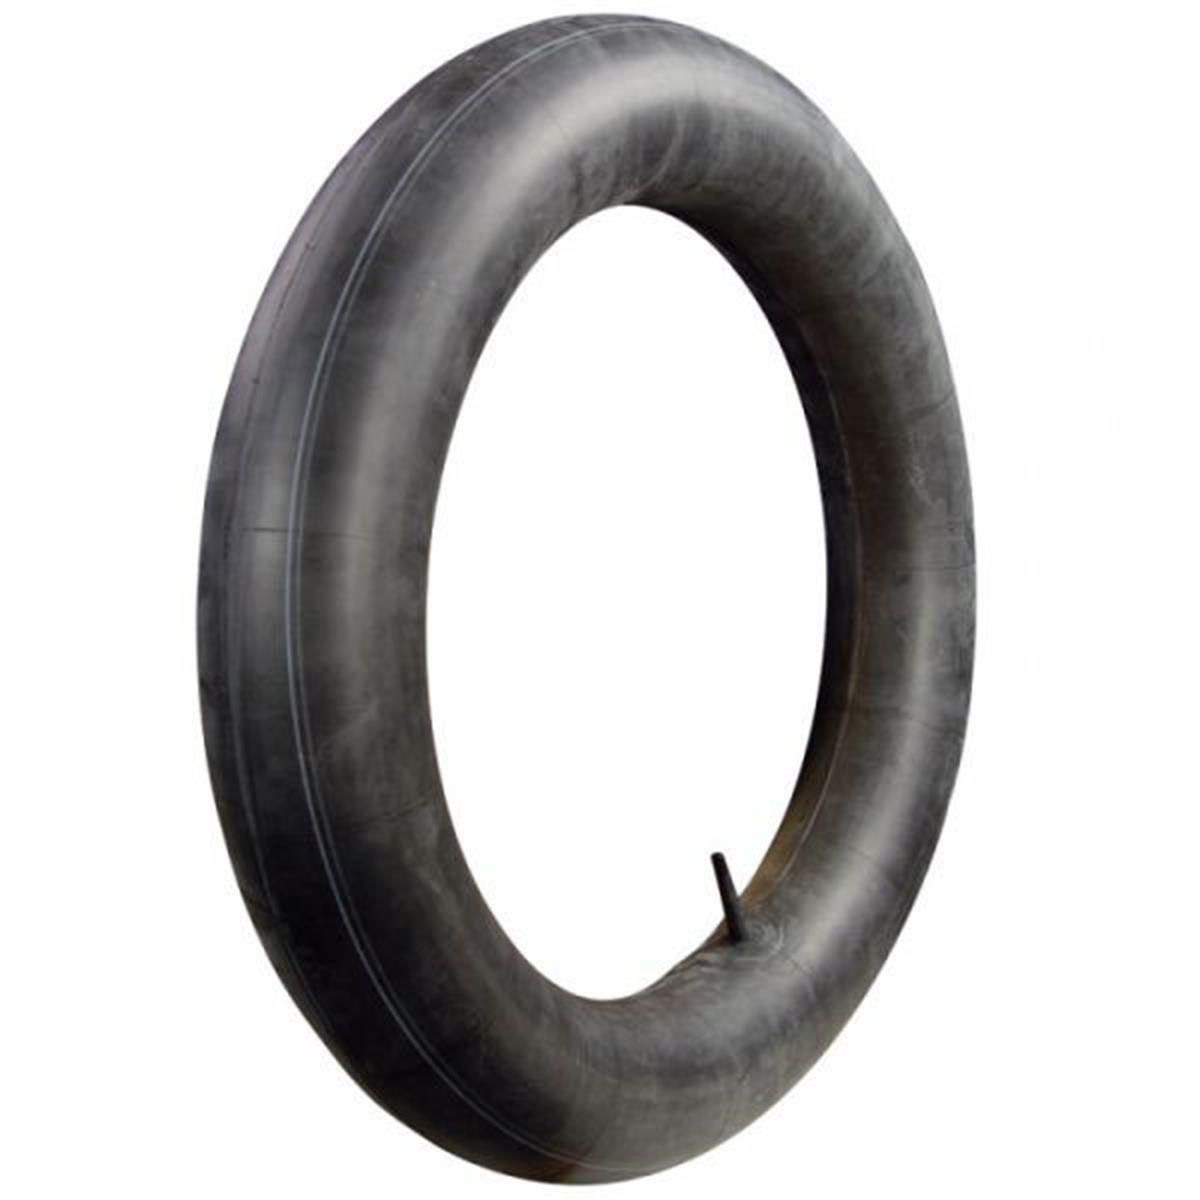 Gibson Extra Heavy Duty 3 mm thick, 110/80-18, 120/80-18, 110/100-18, 120/100-18